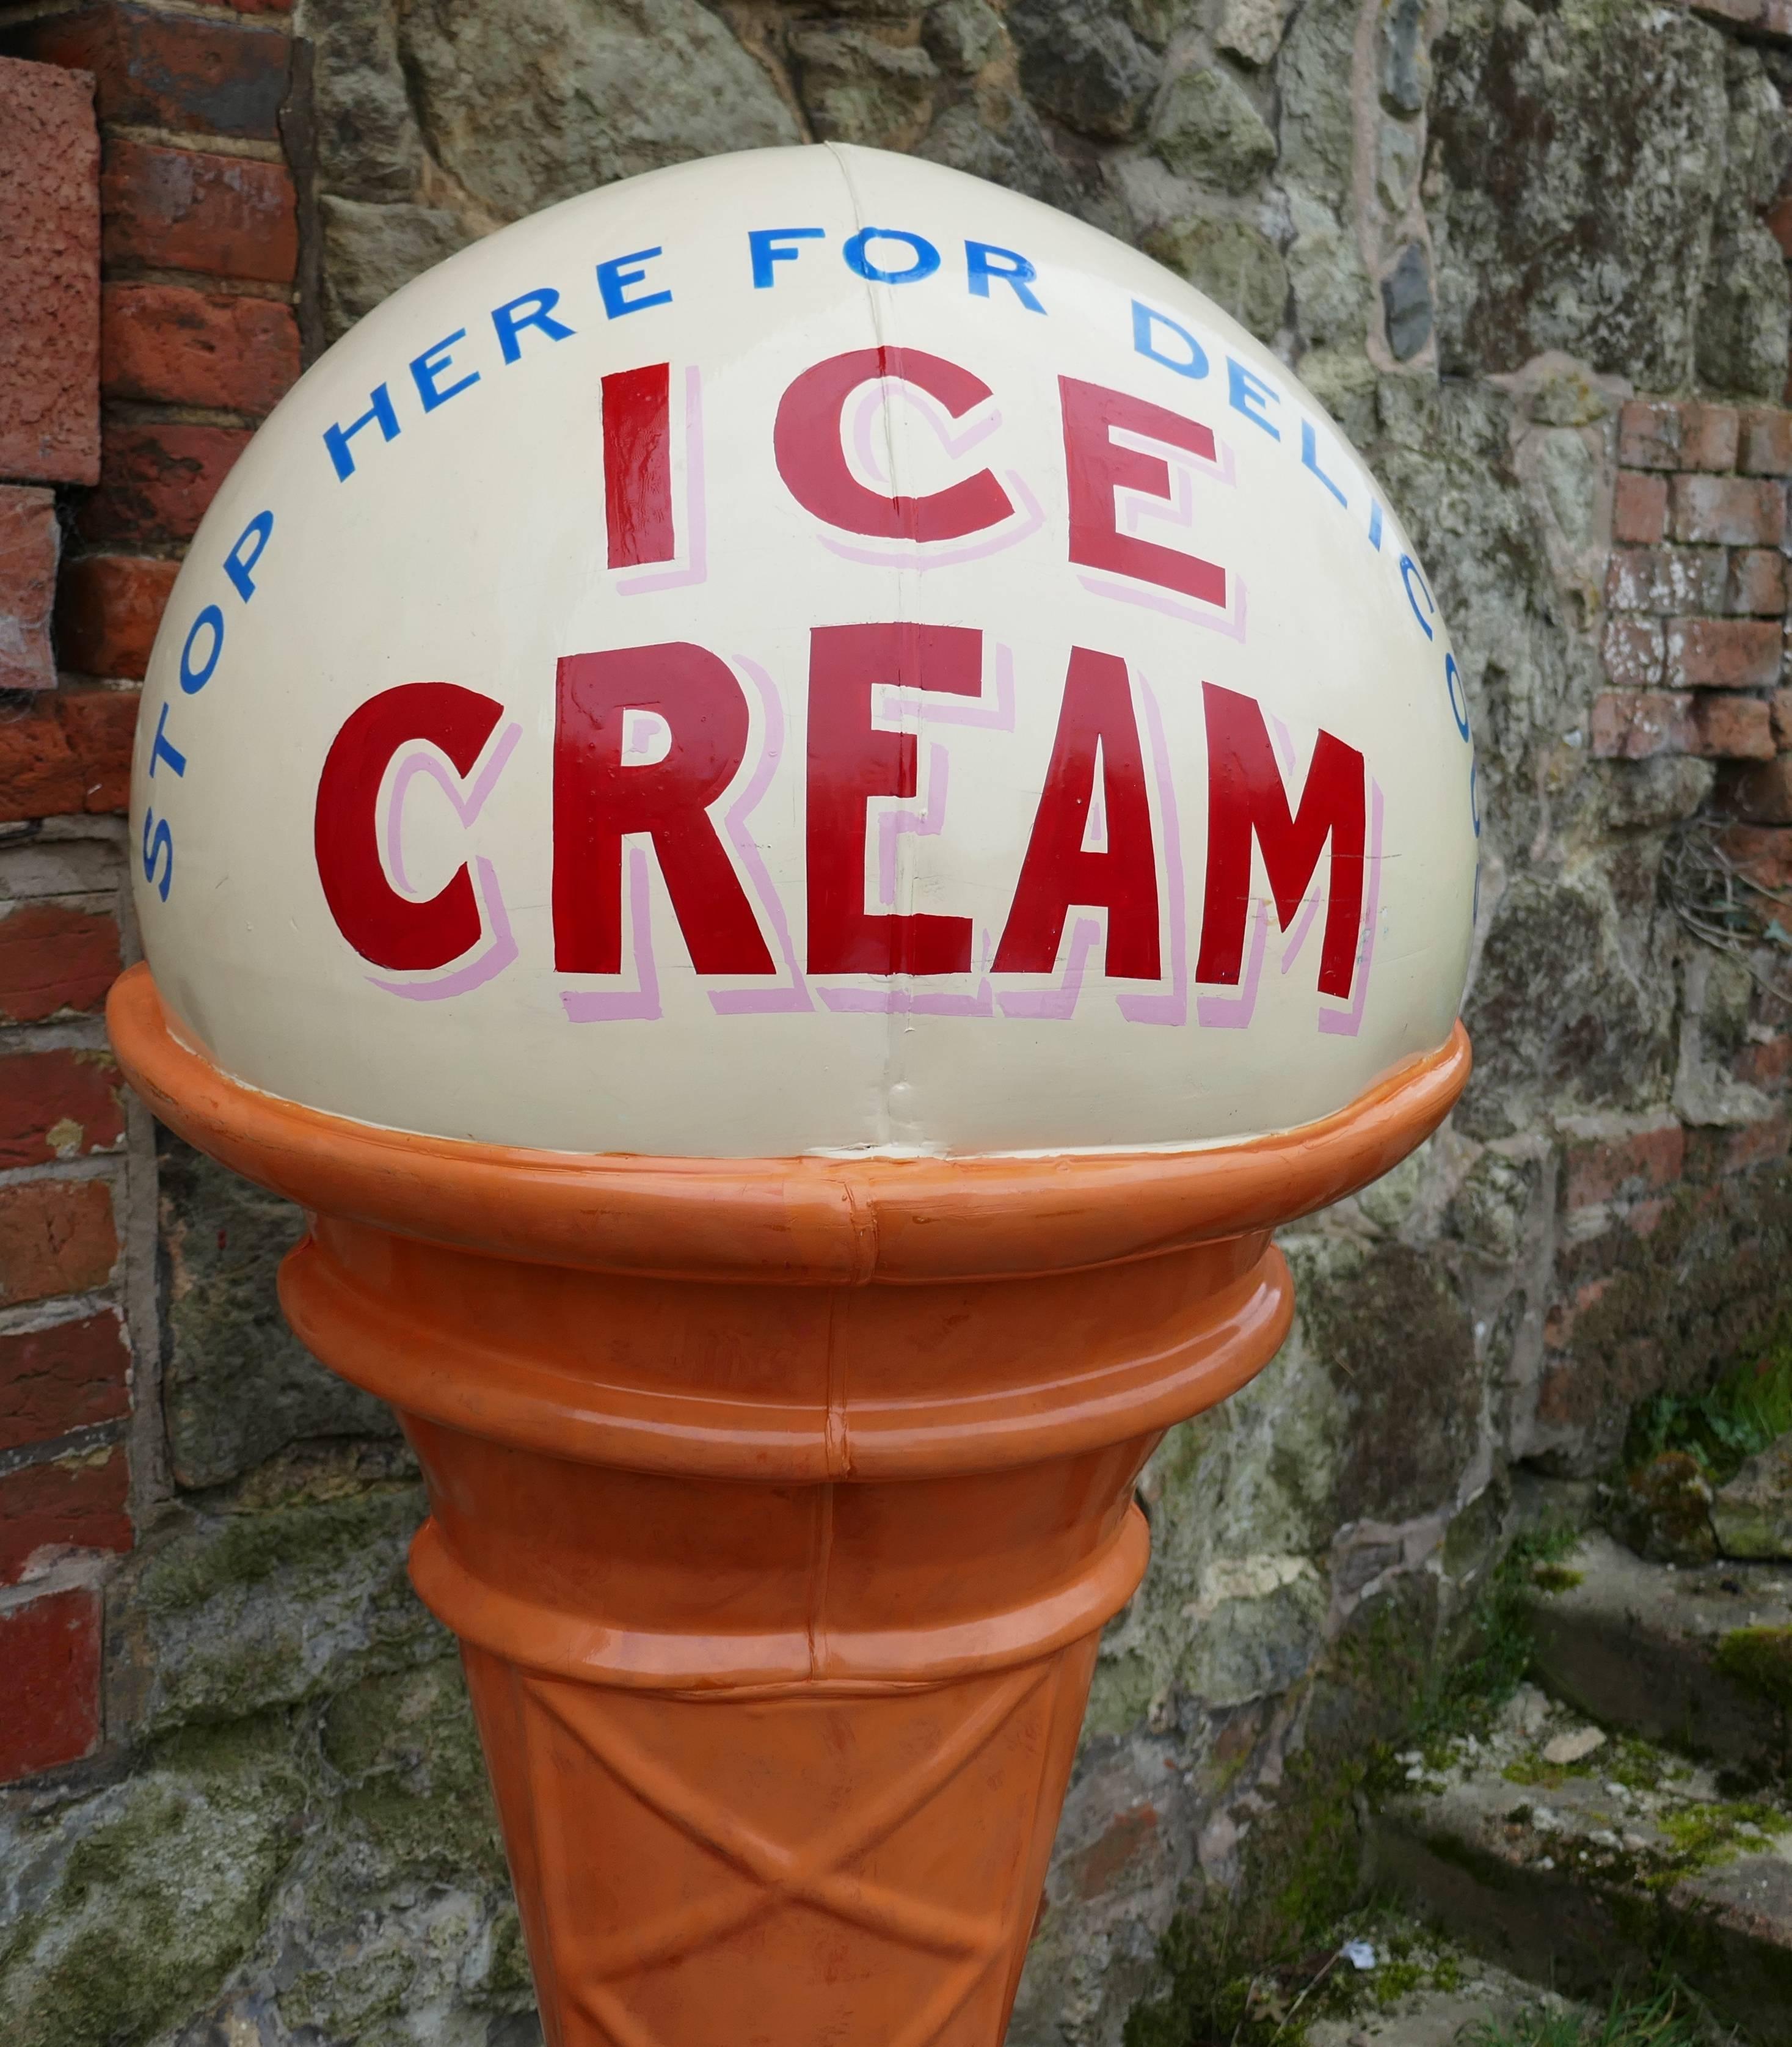 Giant ice cream advertising sign, funky quirky nostalgic.

This is a Classic of the post war era, when a trip to the seaside was the ultimate treat and here we are with a 5 ft tall ice cream 

The sign has a blast filled base, the ice cream can